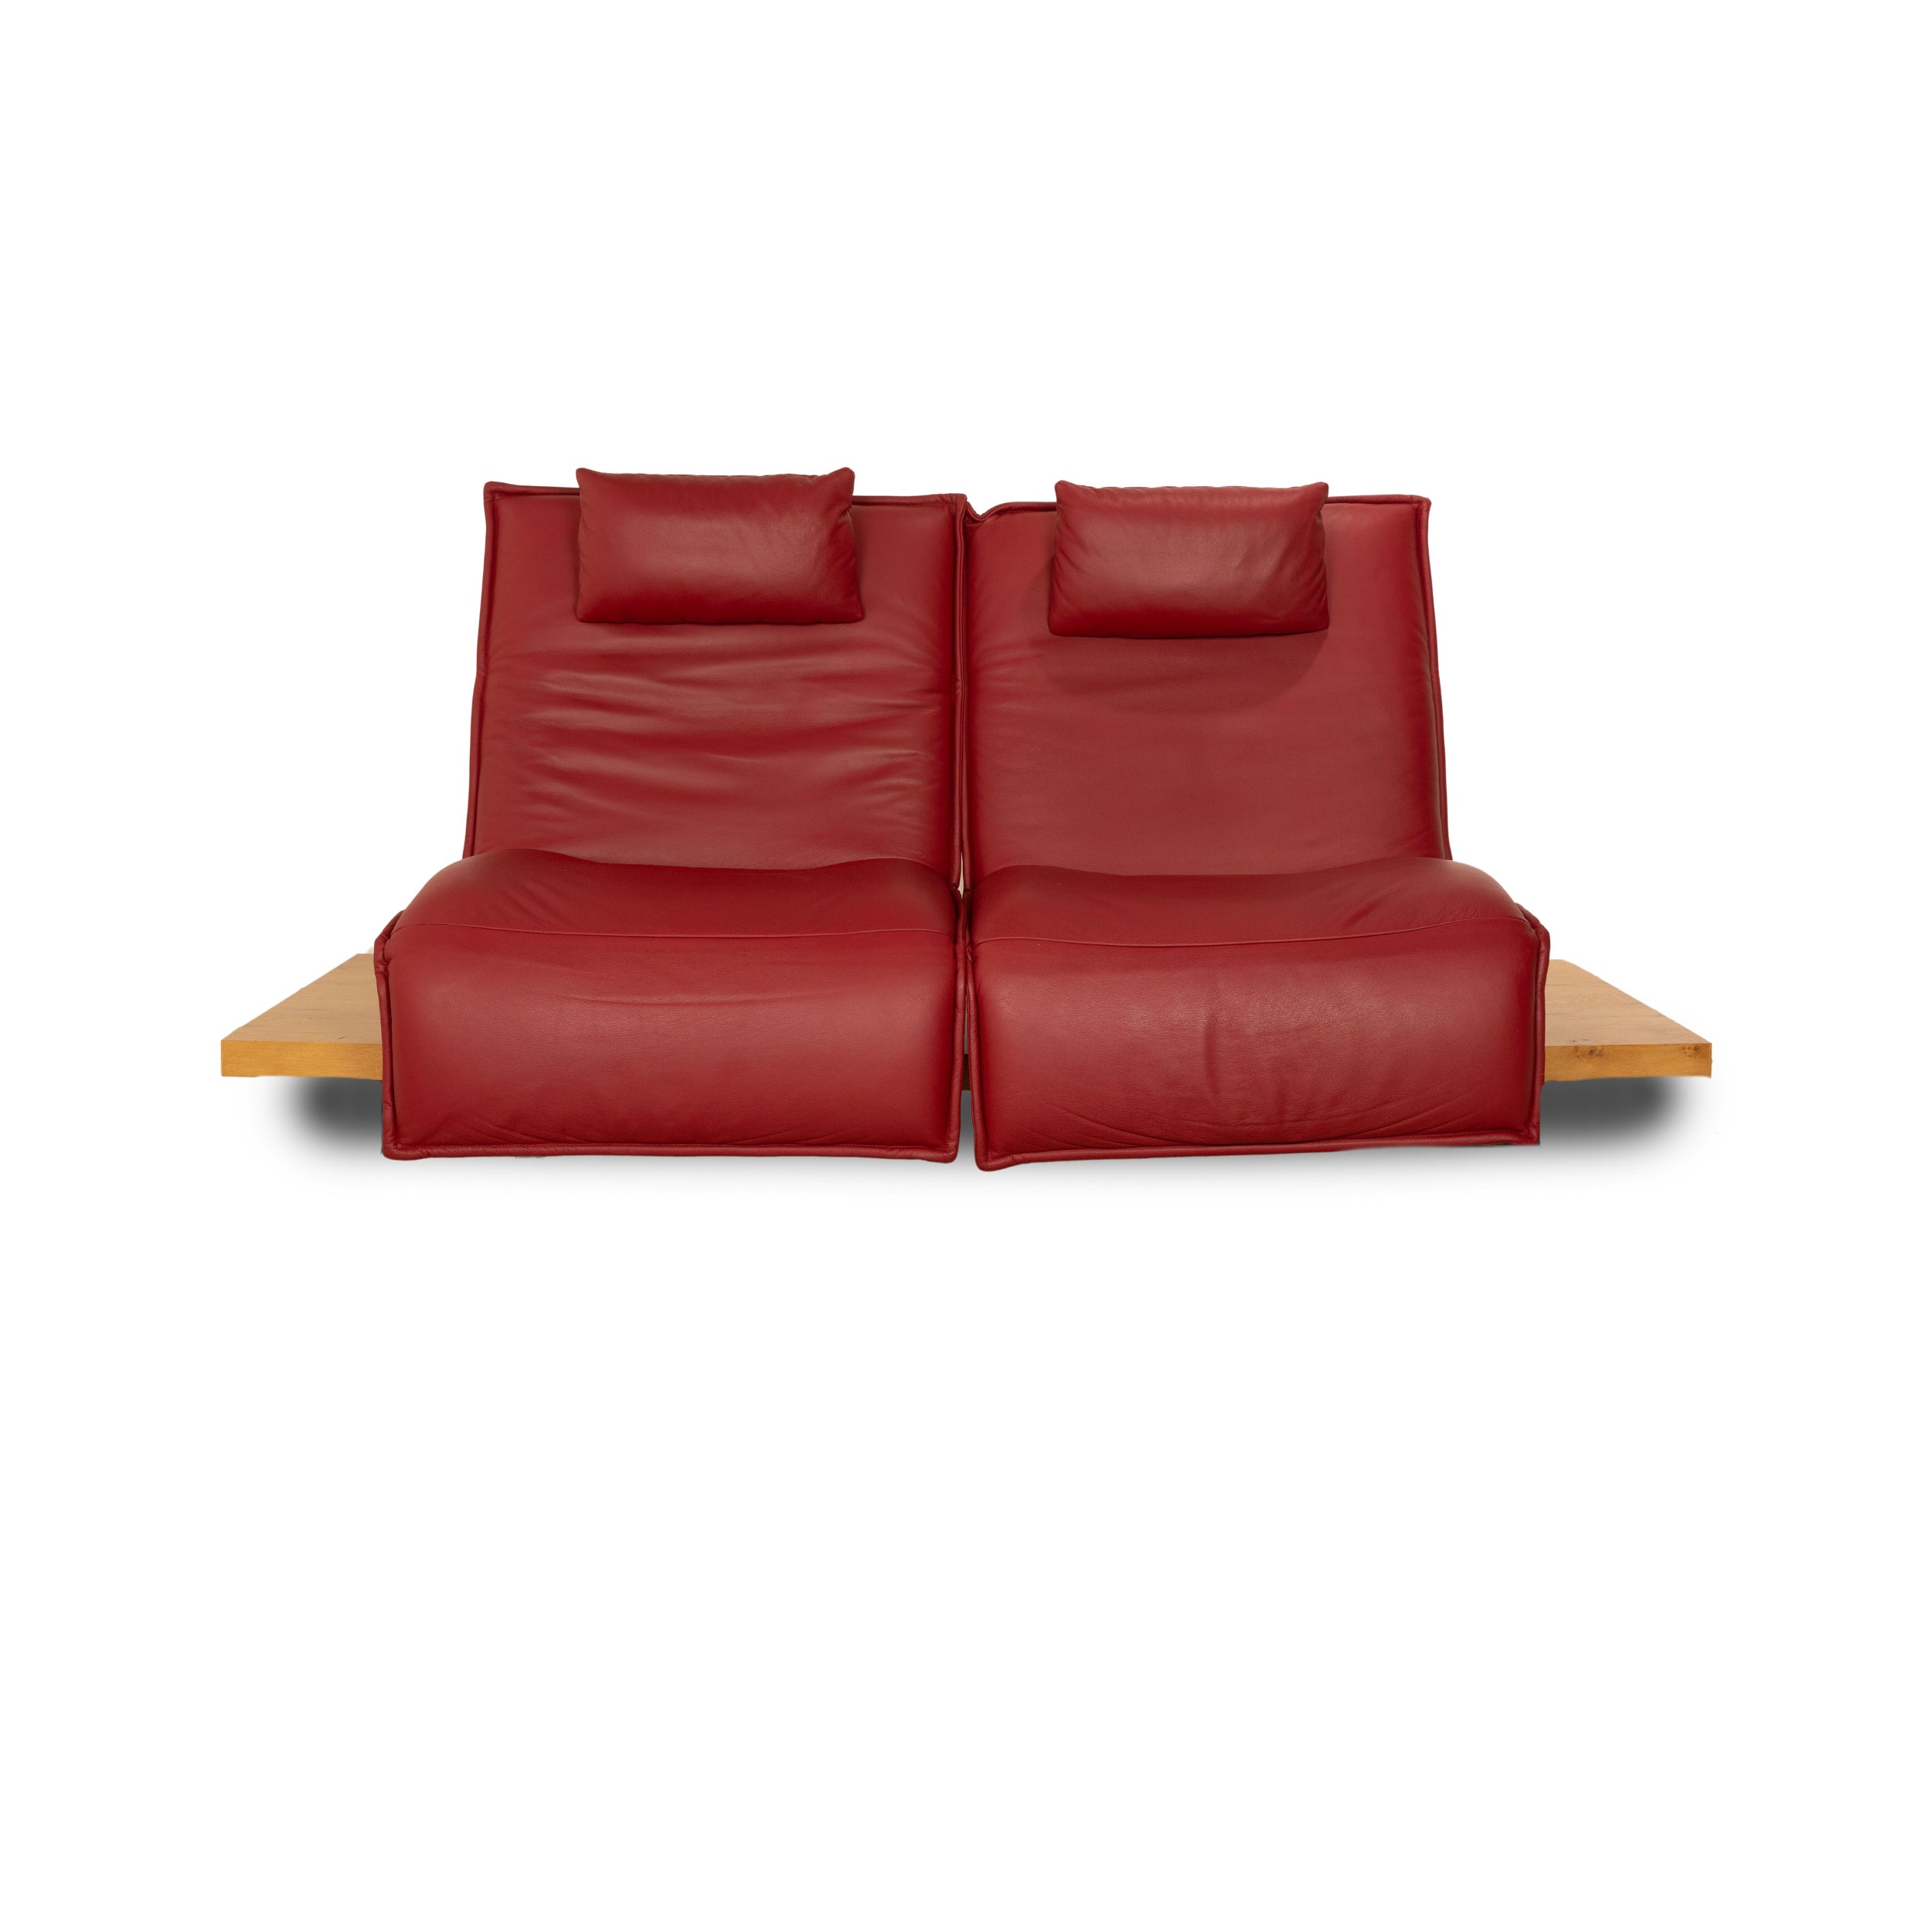 Koinor Free Motion Edit 1 Leather Two Seater Red Electric Function Sofa Couch